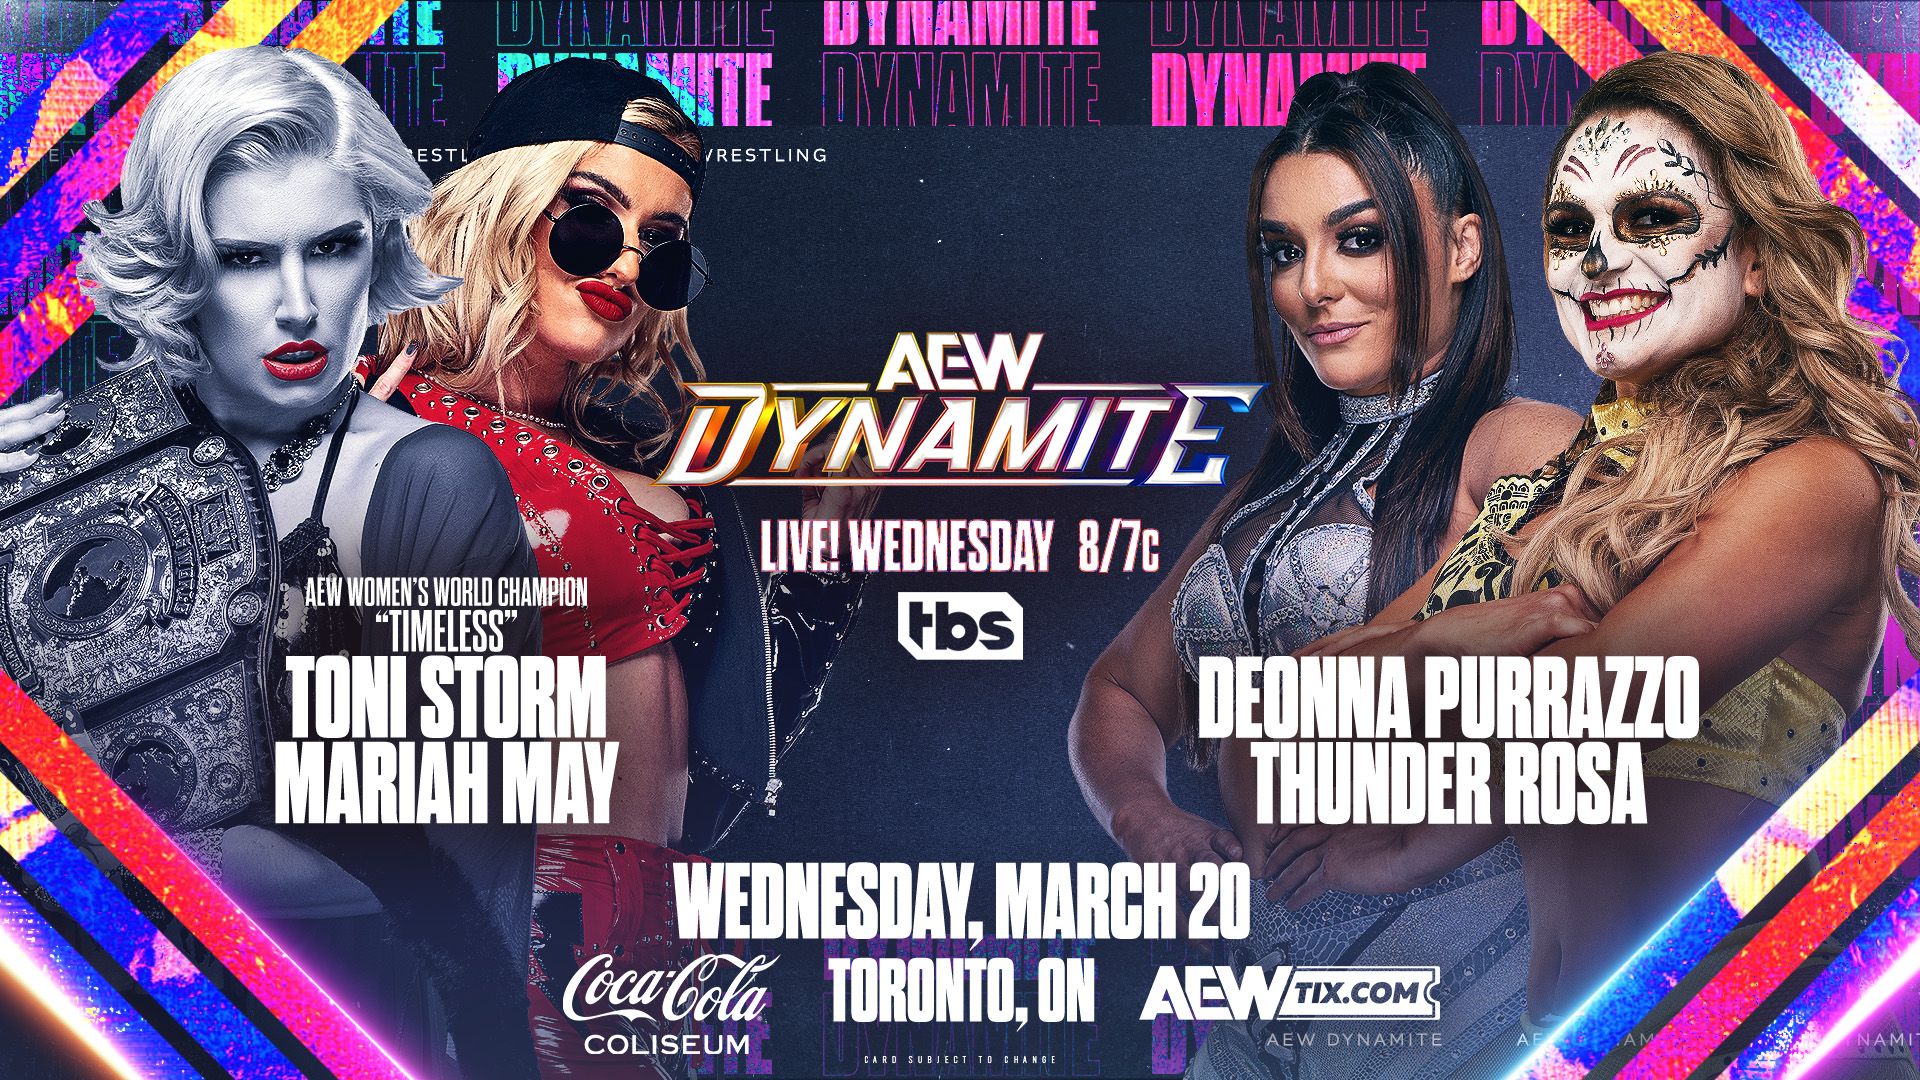 Toni Storm and Mariah May engage in verbal exchanges with Deonna Purrazzo and Thunder Rosa before Dynamite event